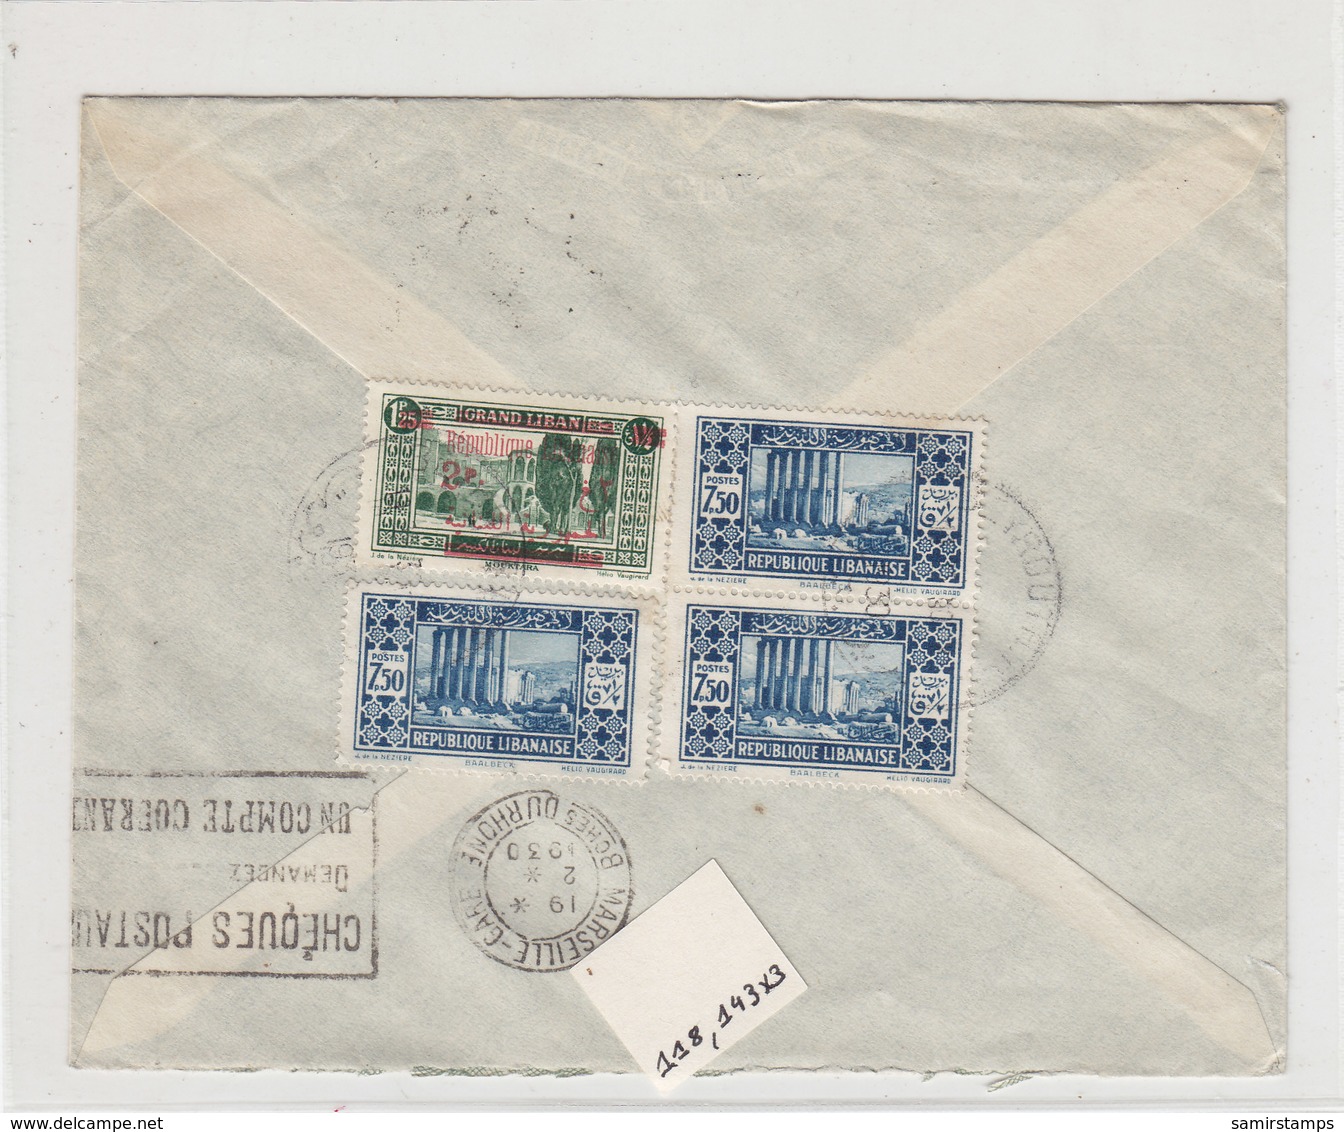 Lebanon-Liban Commercial Cover 1930,verso 4 Stamps,clear Cancel. 2nd Scan Front,fine Condit- Red. Pr. SKRIL PAY ONLY - Lebanon